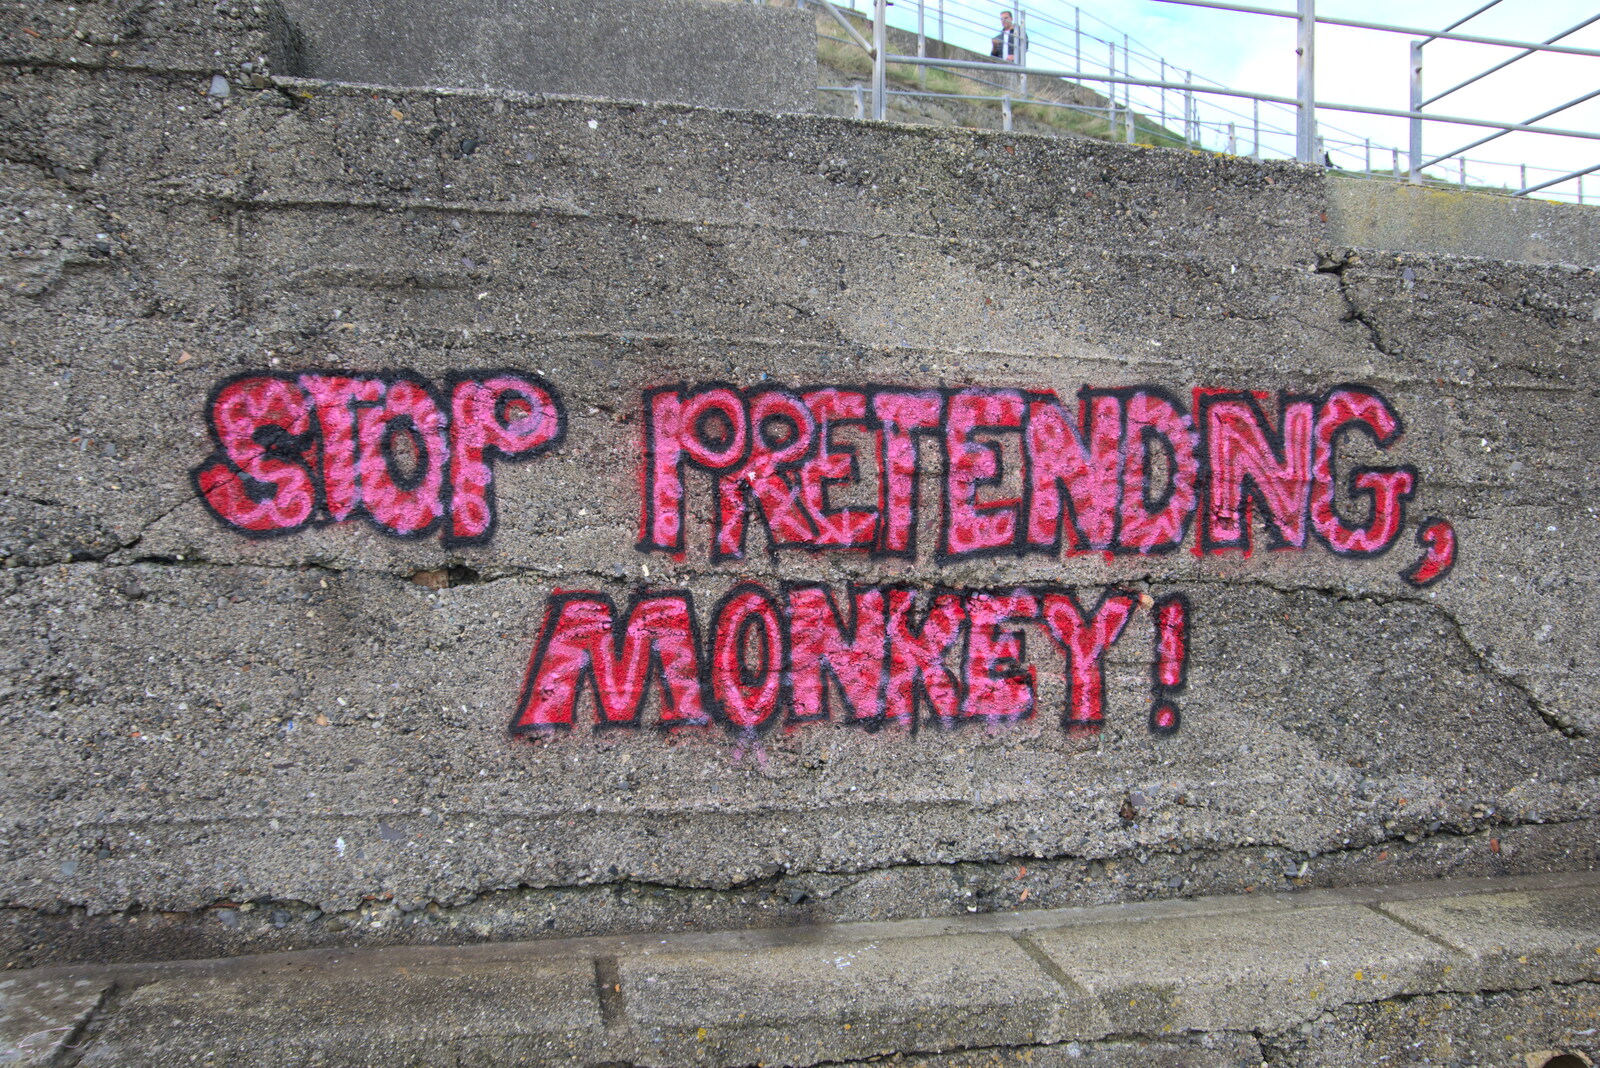 The End of the Breffni, Blackrock, Dublin - 18th February 2023: A message for Monkey